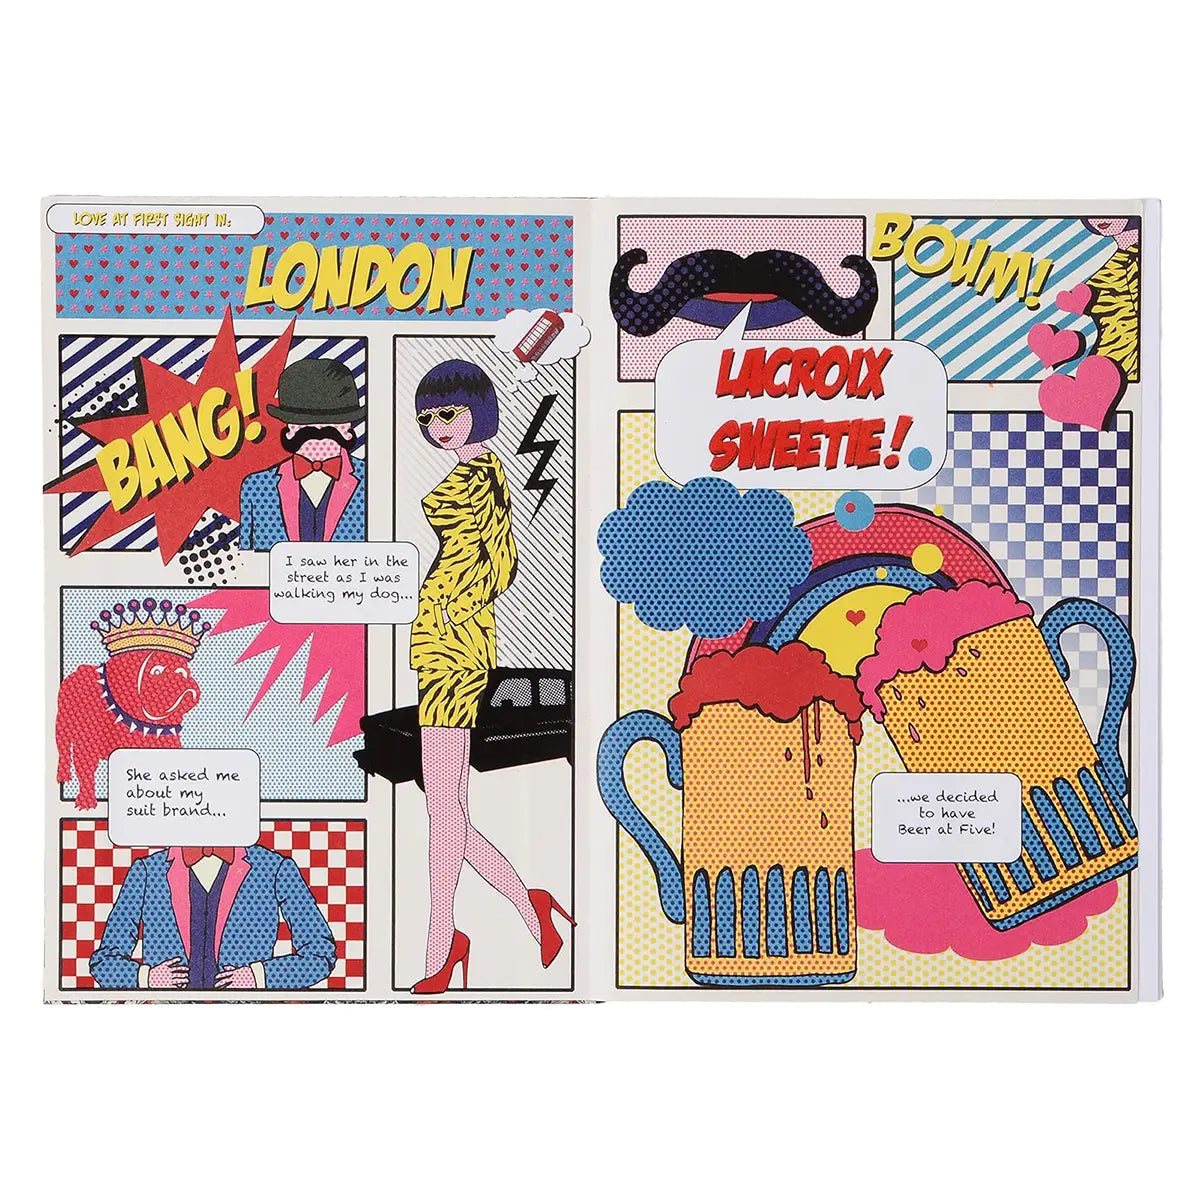 Inside of Hachette Christian Lacroix London A5 Notebook with Comic, reading LOVE AT FIRST SITE, LONDON, BANG!, I SAW HER IN THE STREET AS I WAS WALKING MY DOG... SHE ASHED ME ABOUT MY SUIT BRAND... BOUM! LACROIX SWEETIE! WE DECIDED TO HAVE BEER AT FIVE!